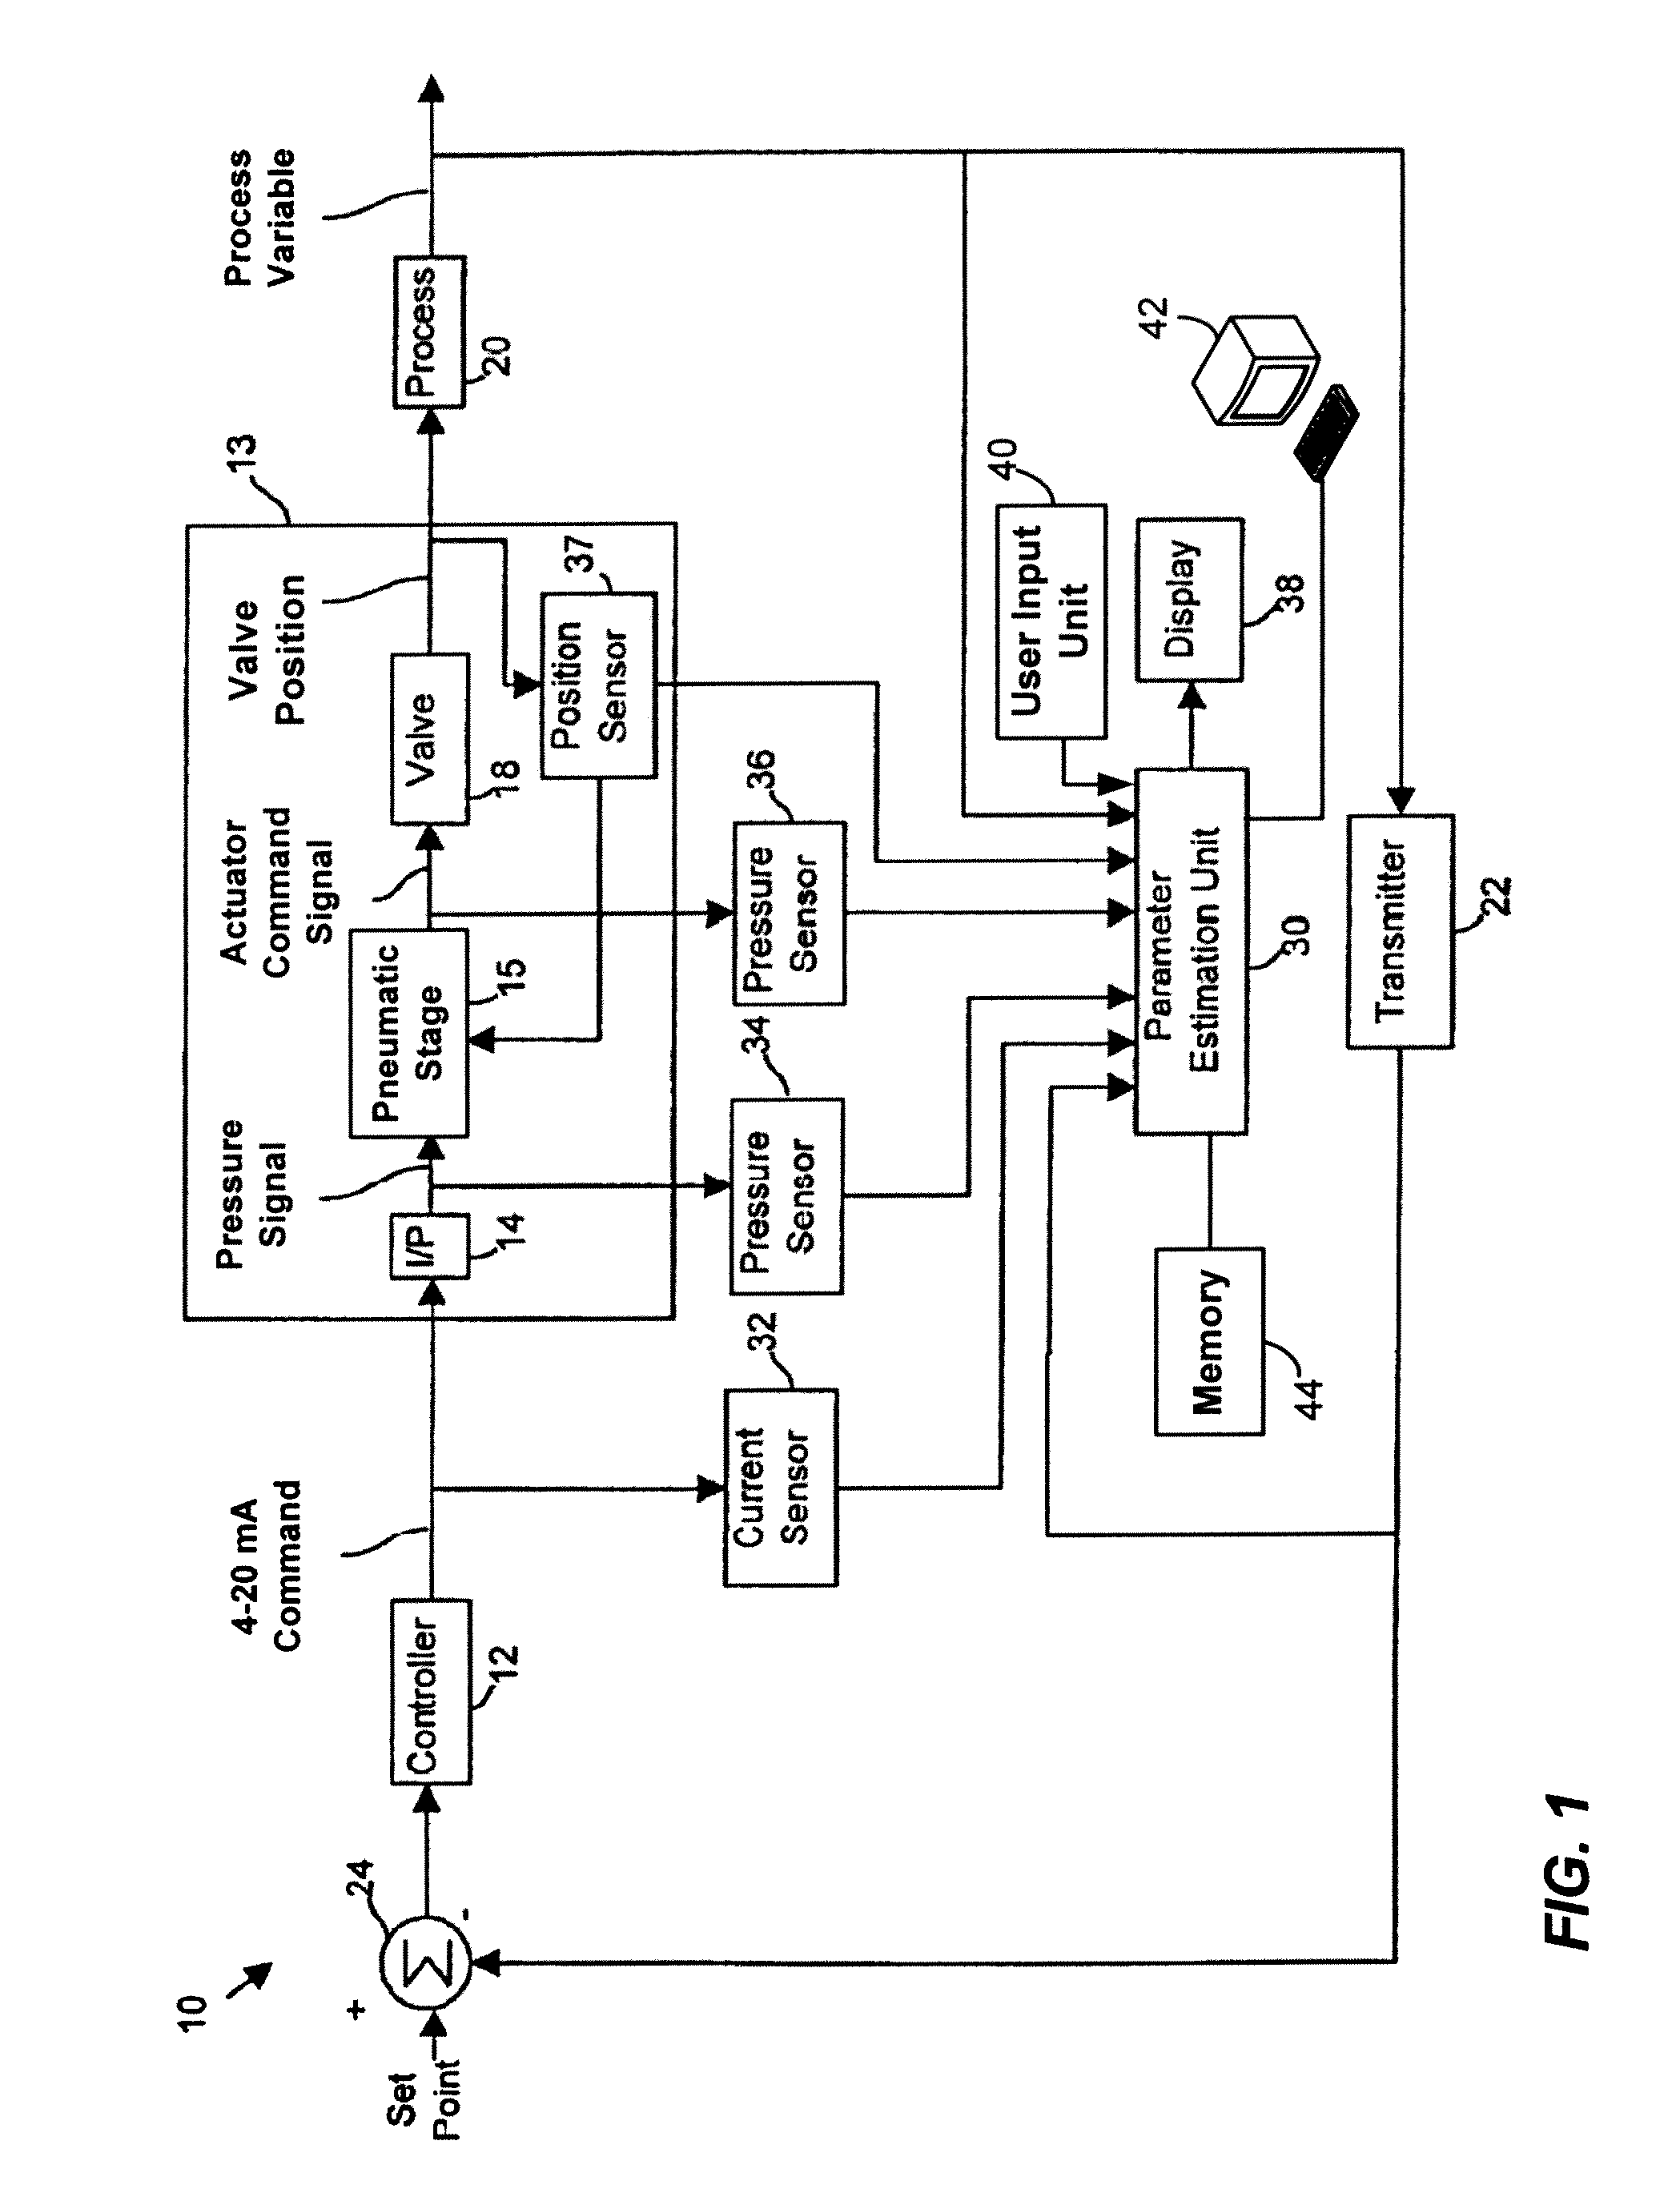 Estimation of process control parameters over predefined travel segments